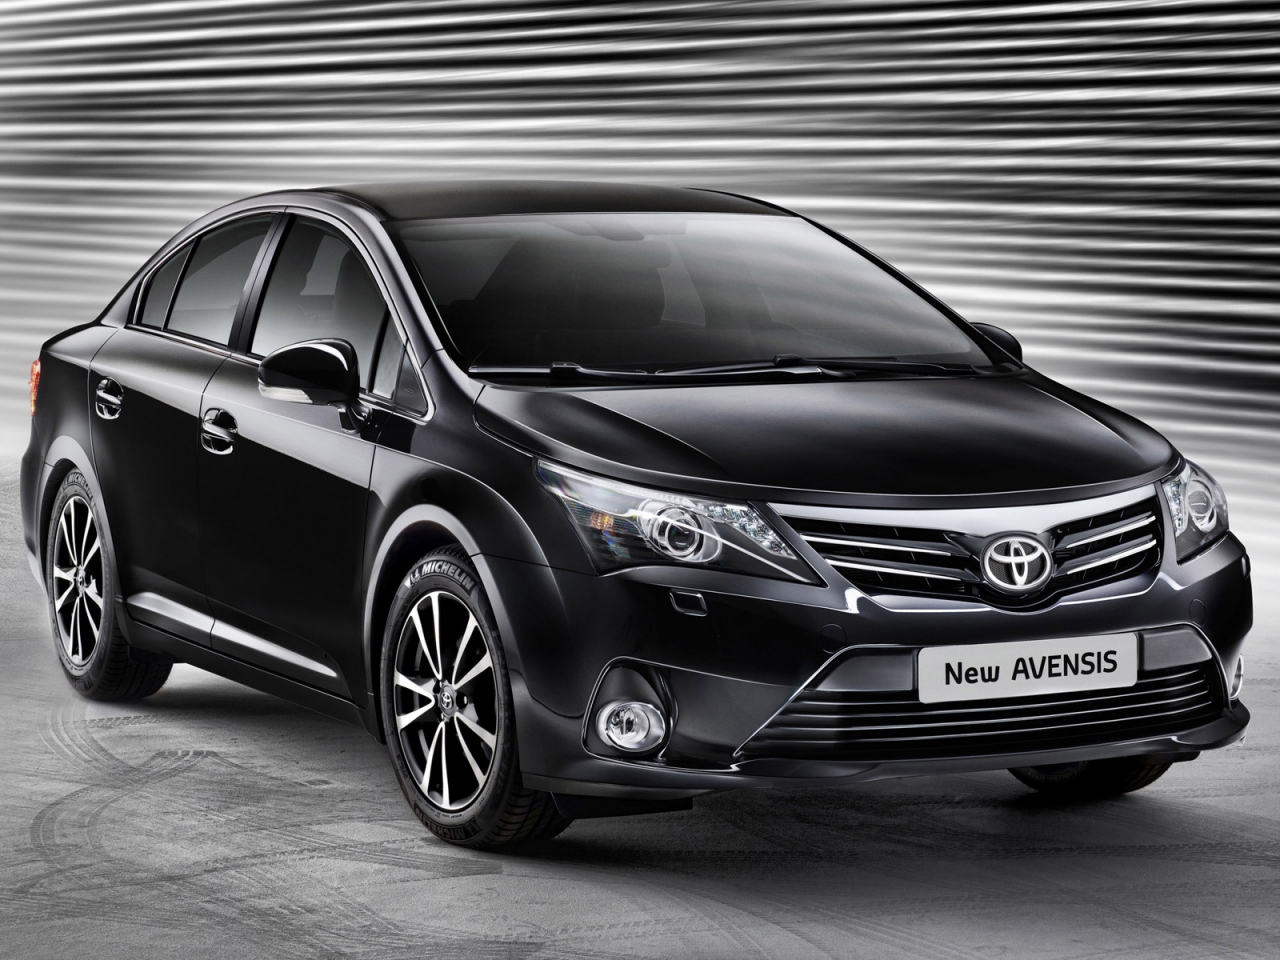 2012 Toyota Avensis for 1280 x 960 resolution